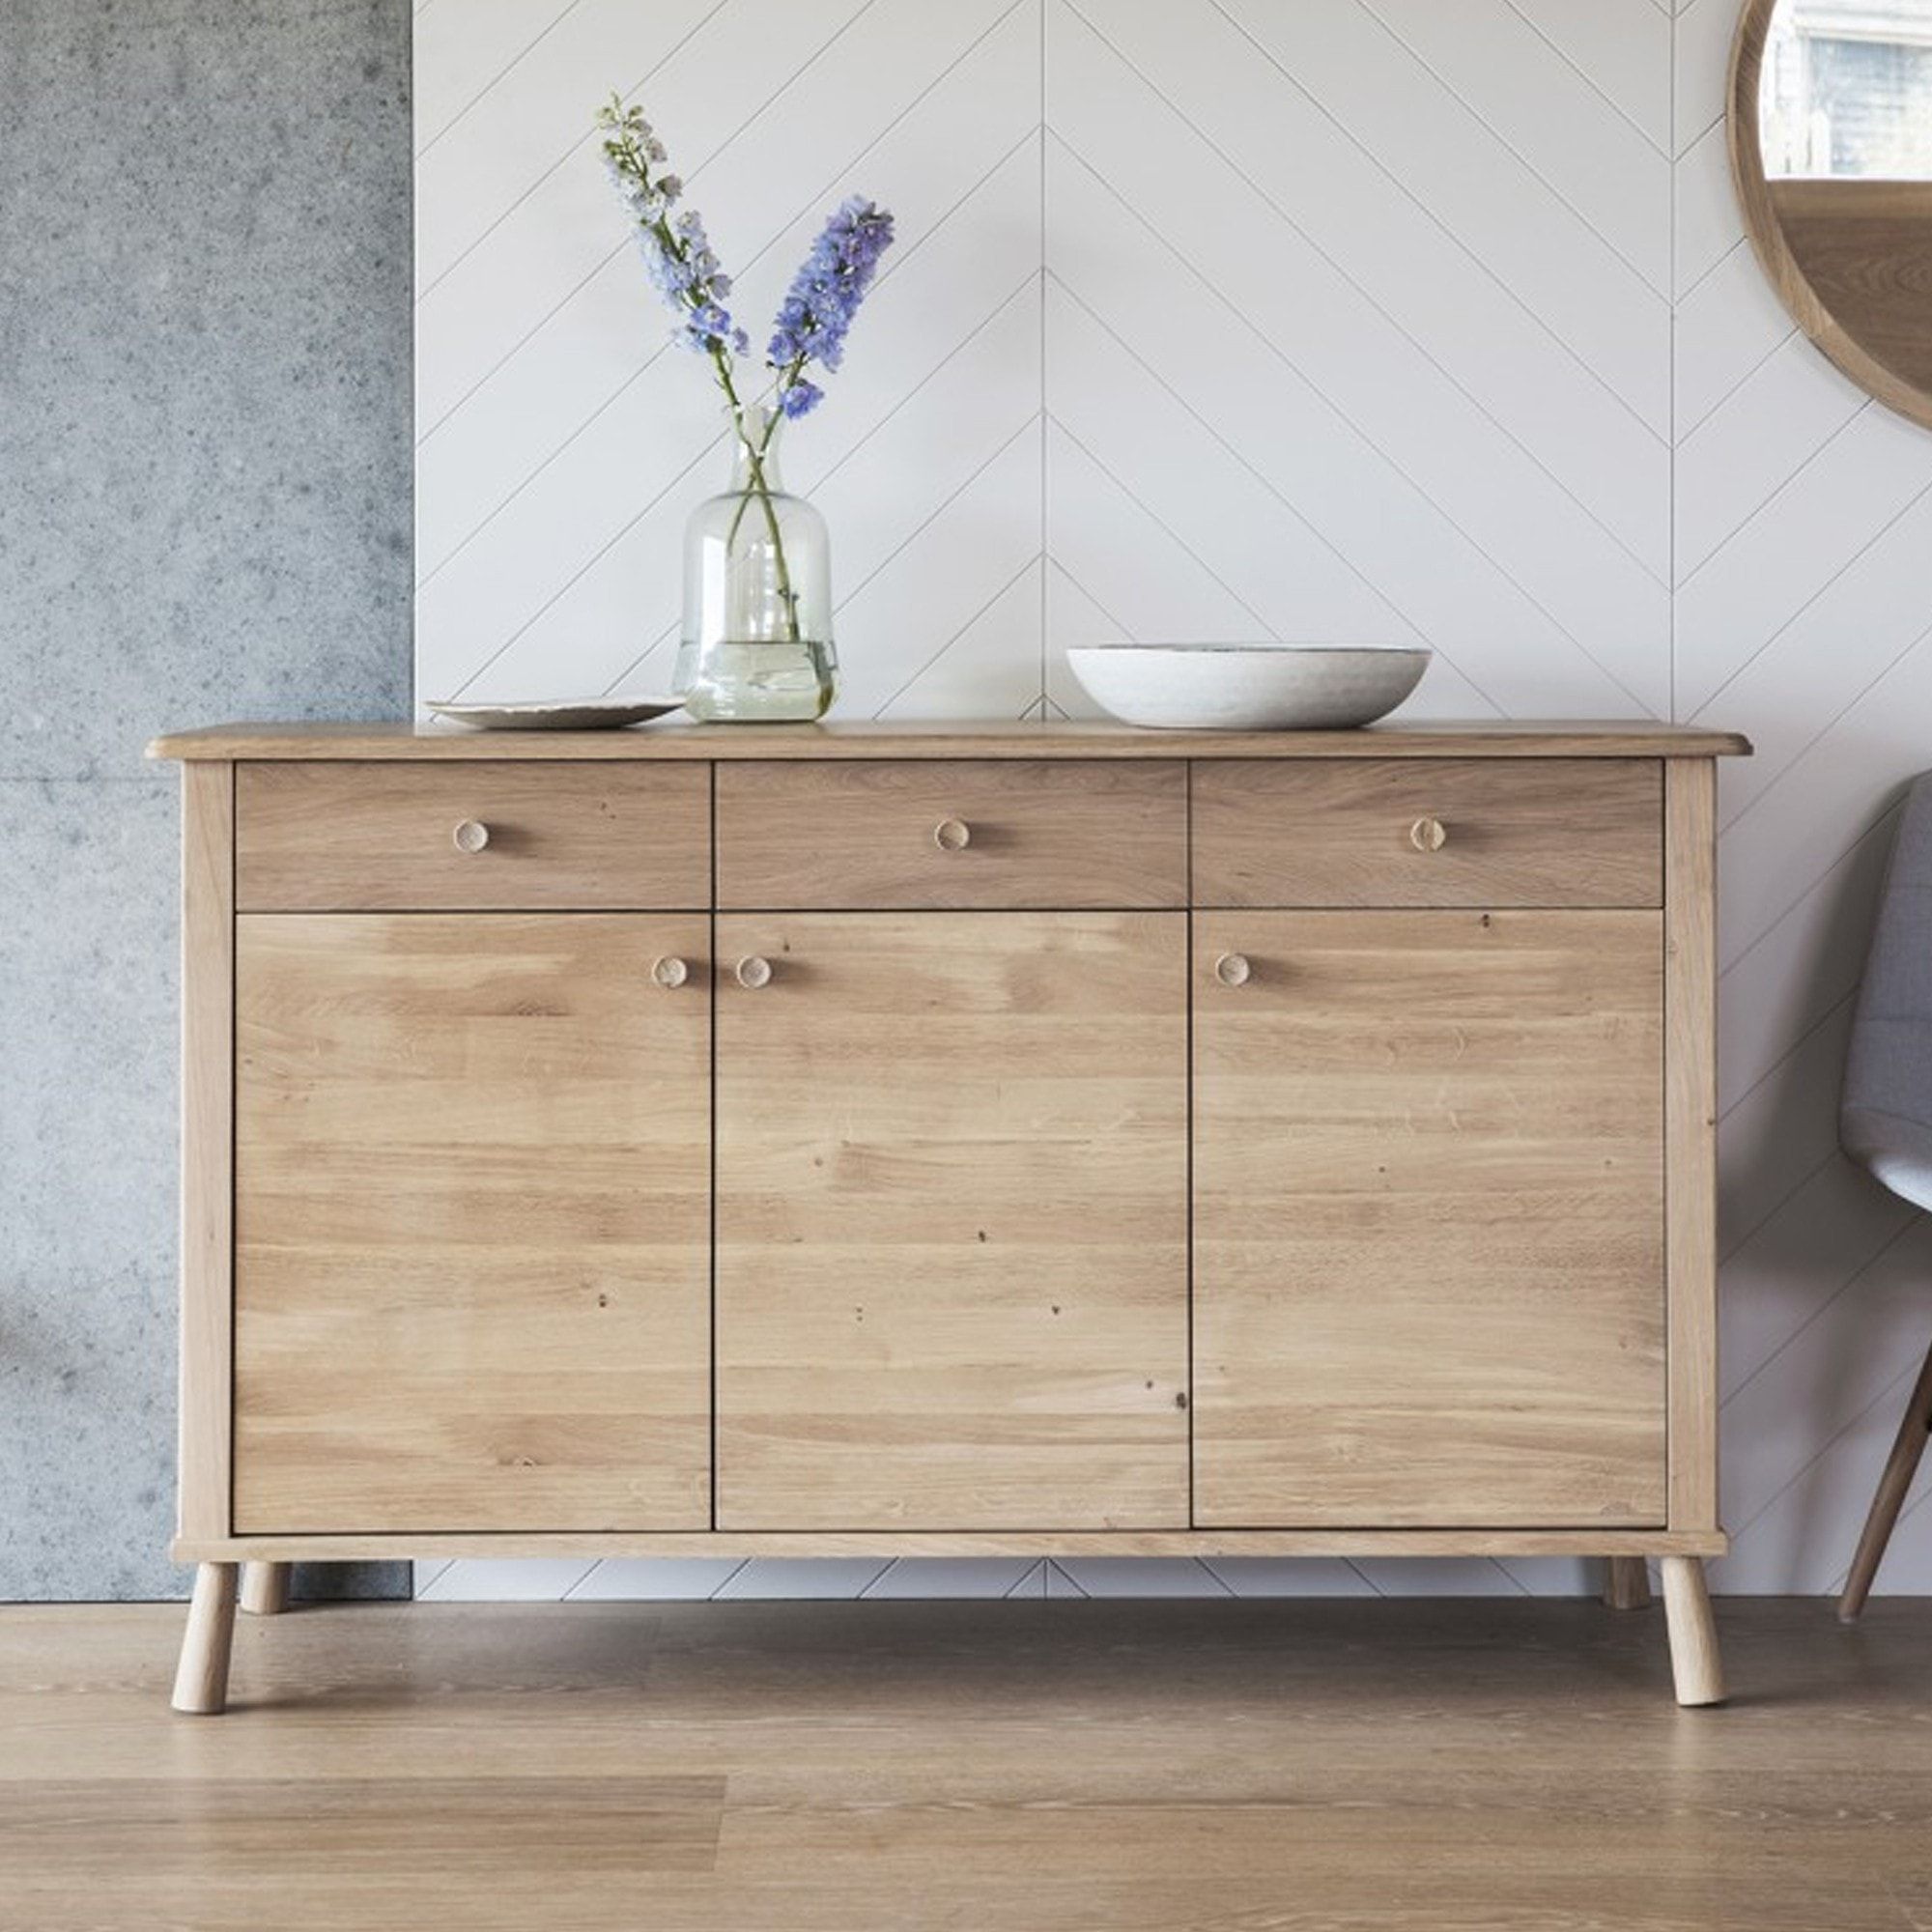 Wycombe 3 Door 3 Drawer Sideboard | Wooden Sideboards With Storage With Regard To Most Current Sideboards With 3 Drawers (Photo 4 of 15)